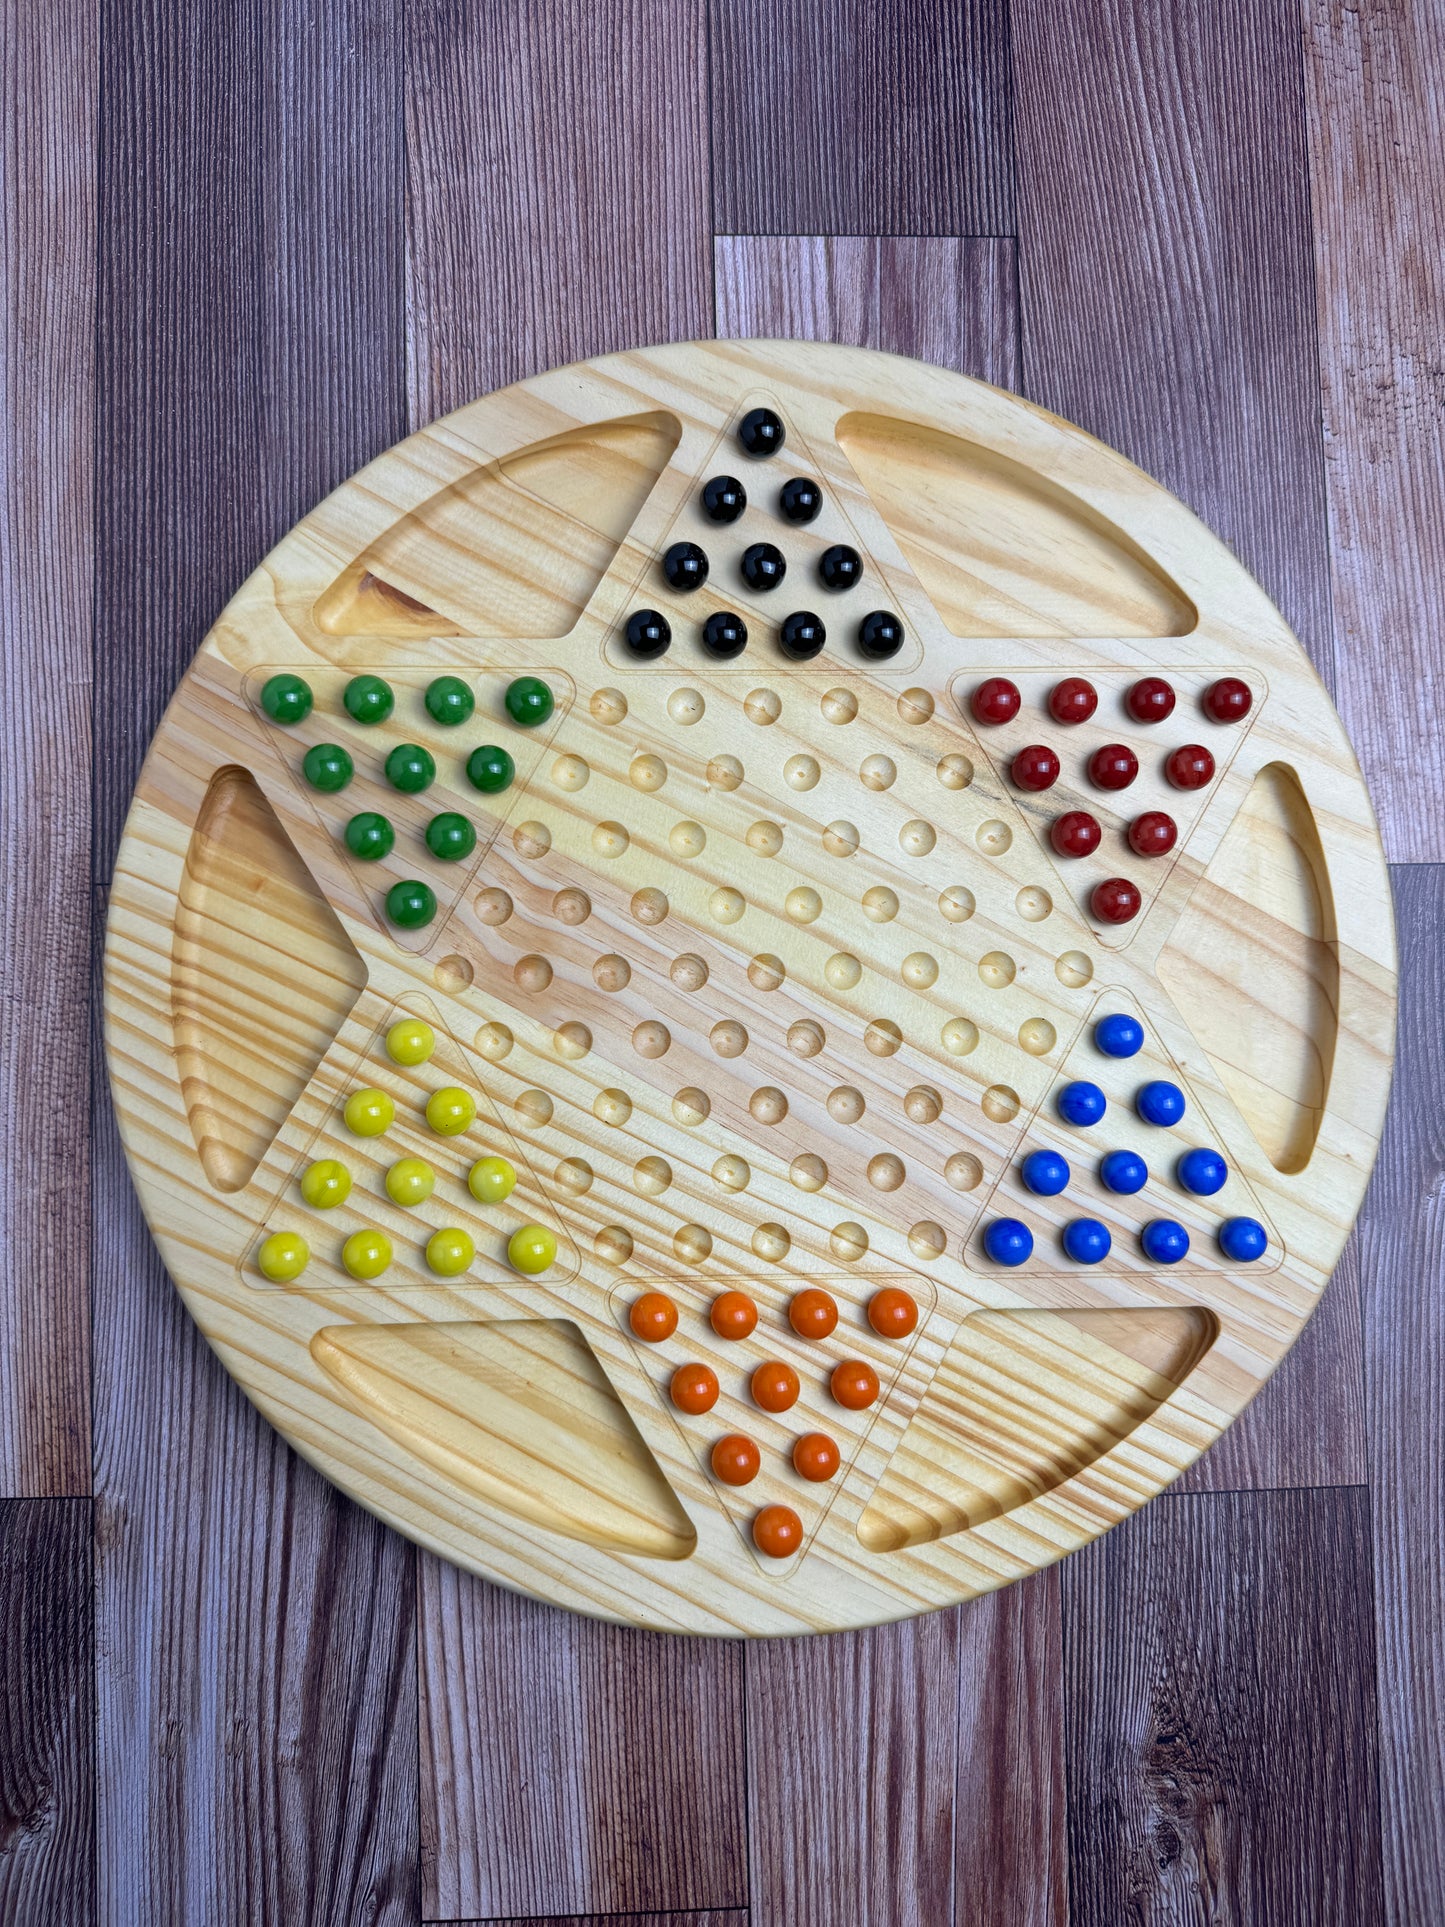 Chinese Checkers board